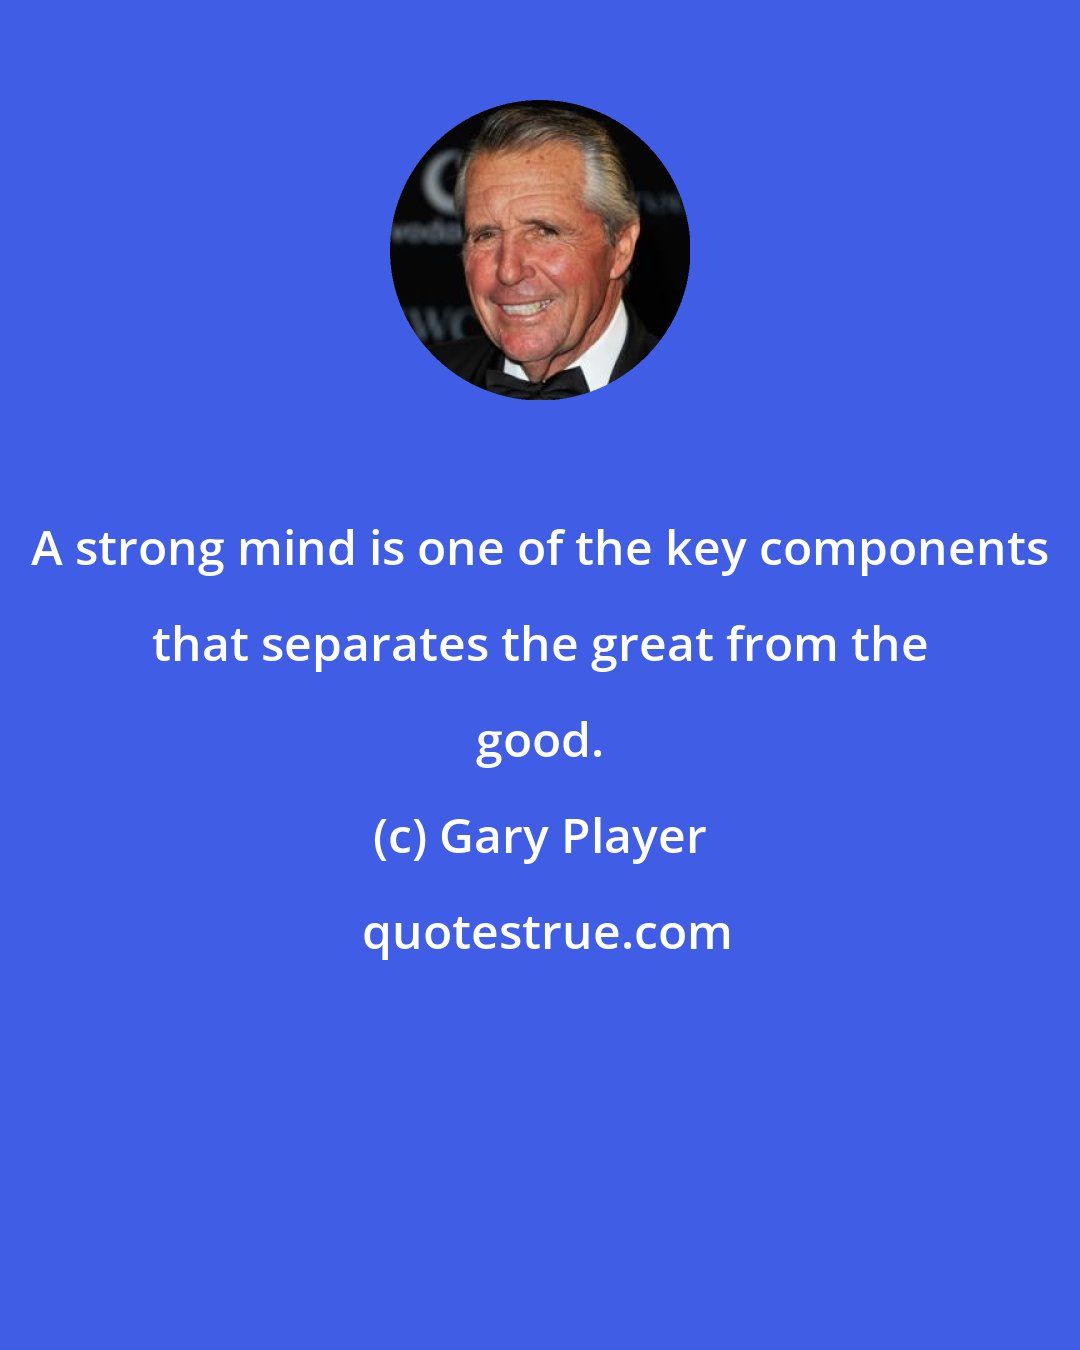 Gary Player: A strong mind is one of the key components that separates the great from the good.